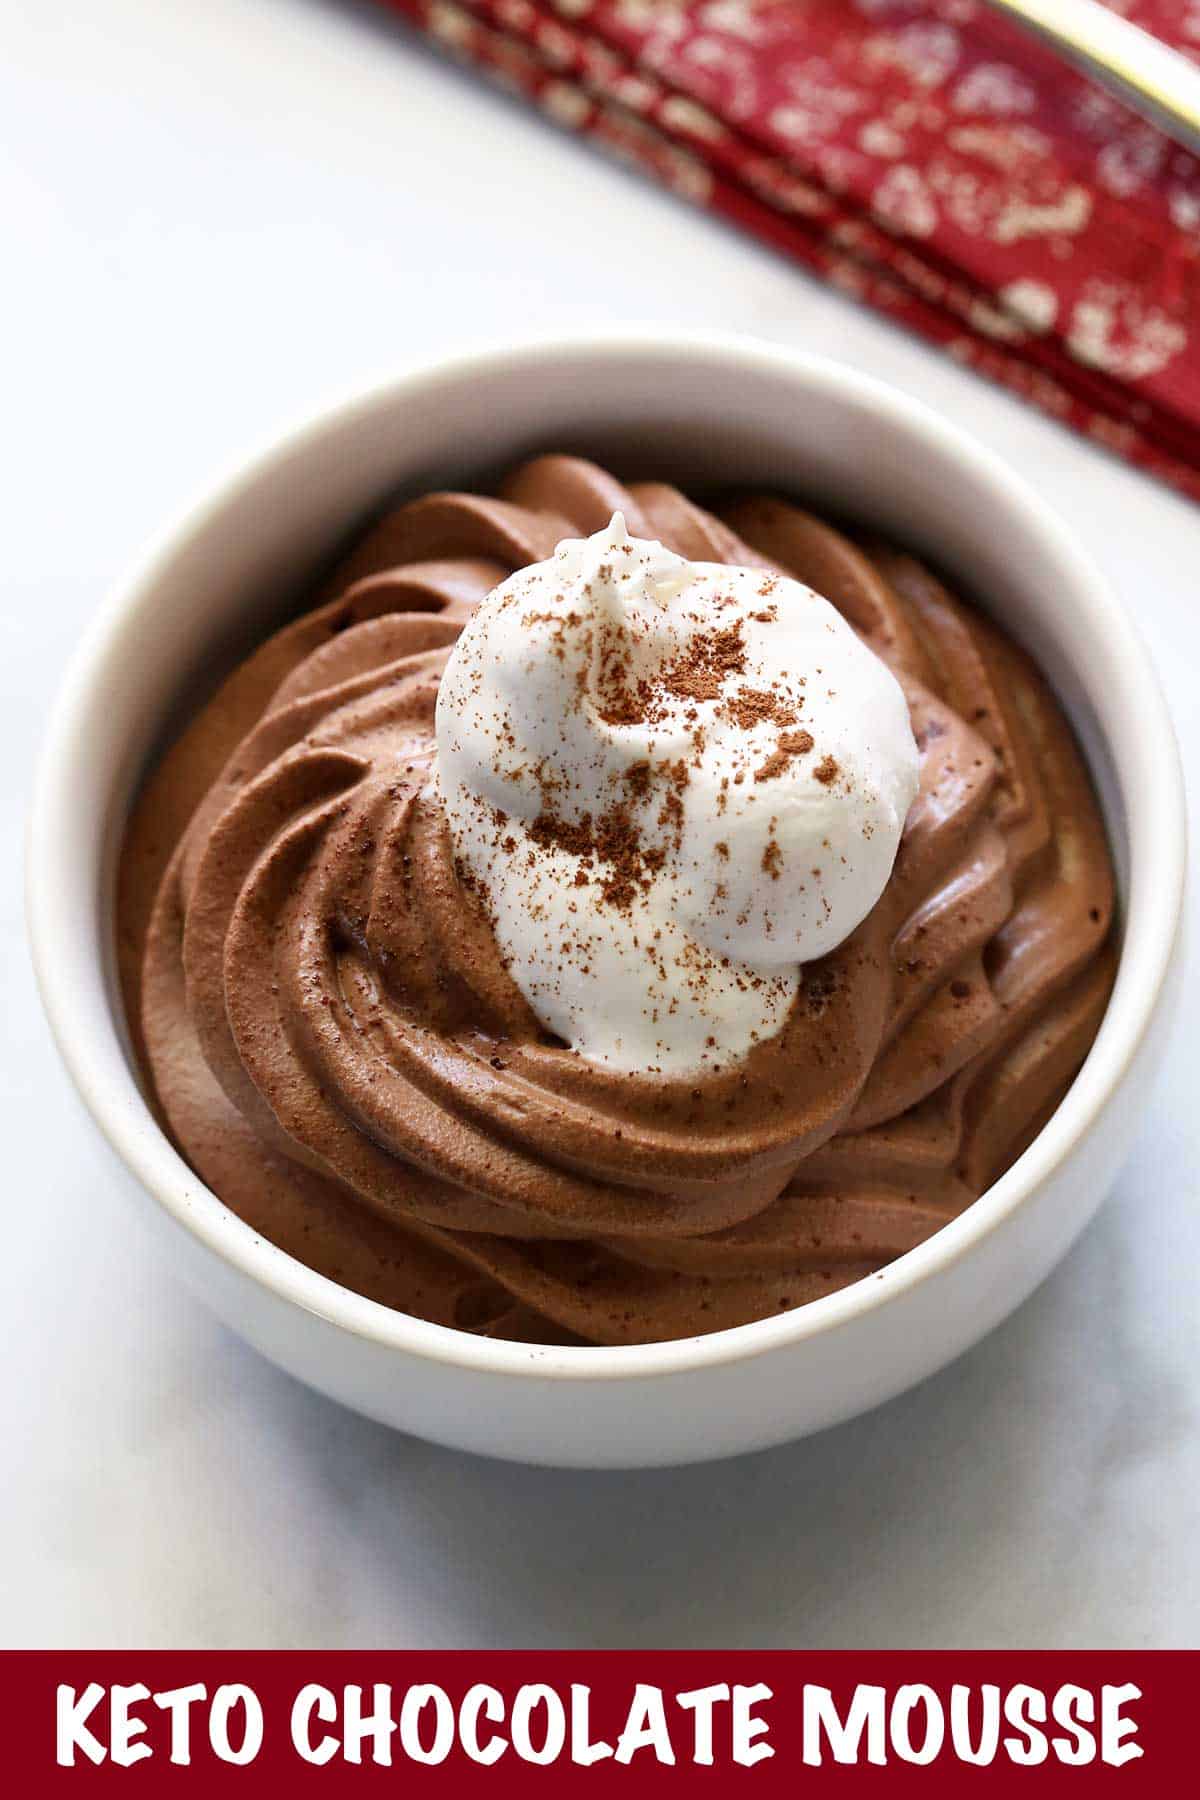 Low-carb chocolate mousse served in a bowl